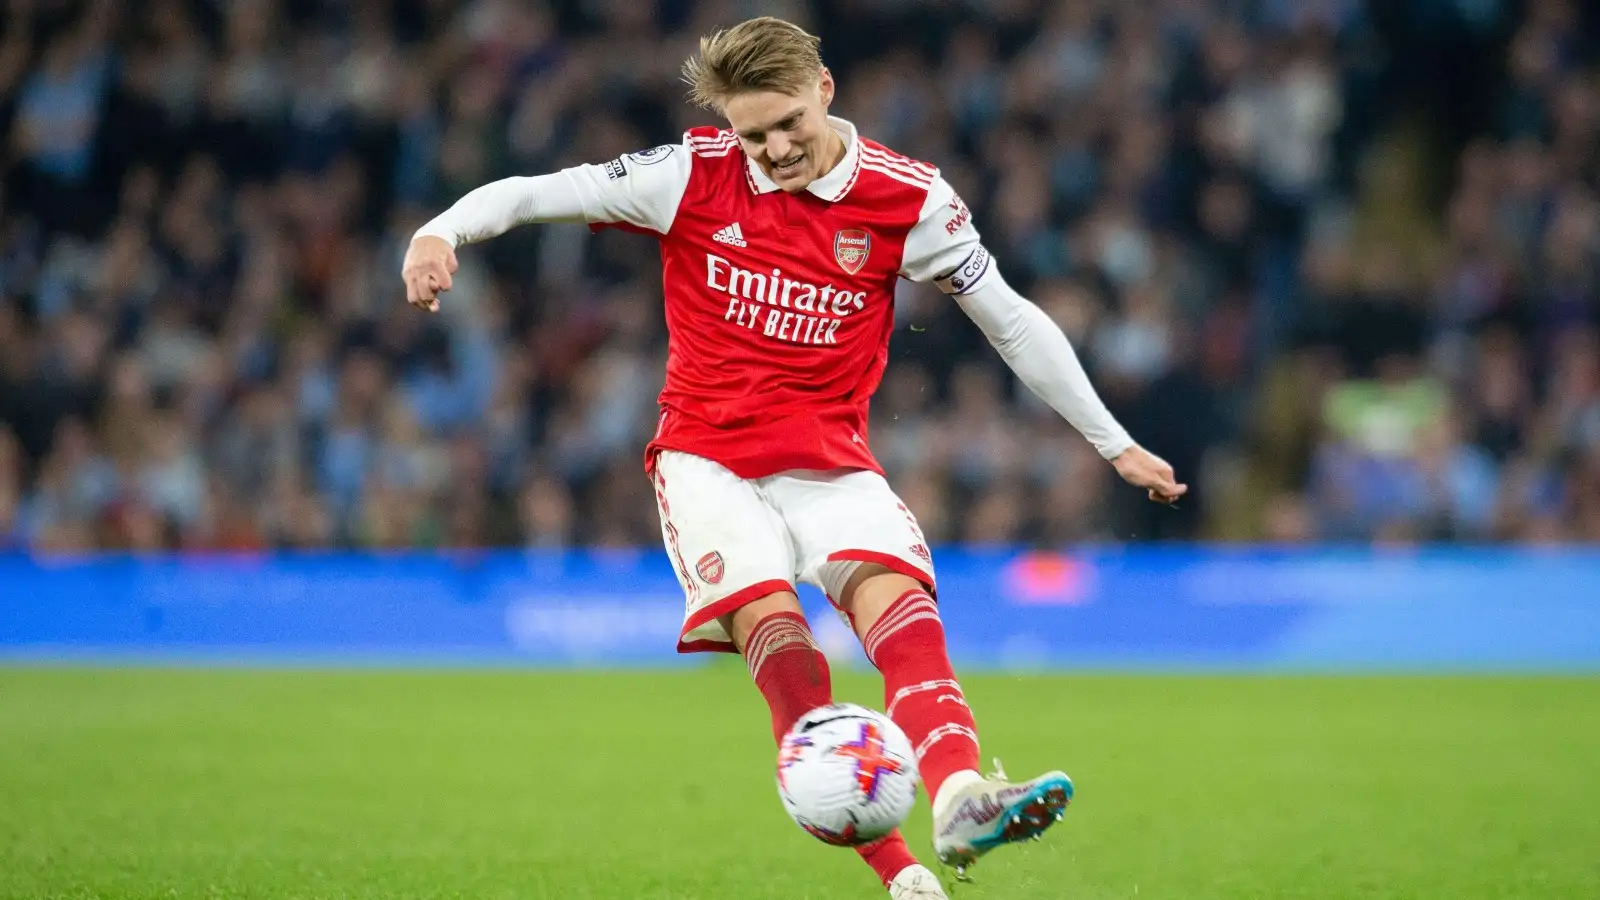 An Arsenal fan has been posting a sublime Odegaard pass every day and it’s glorious